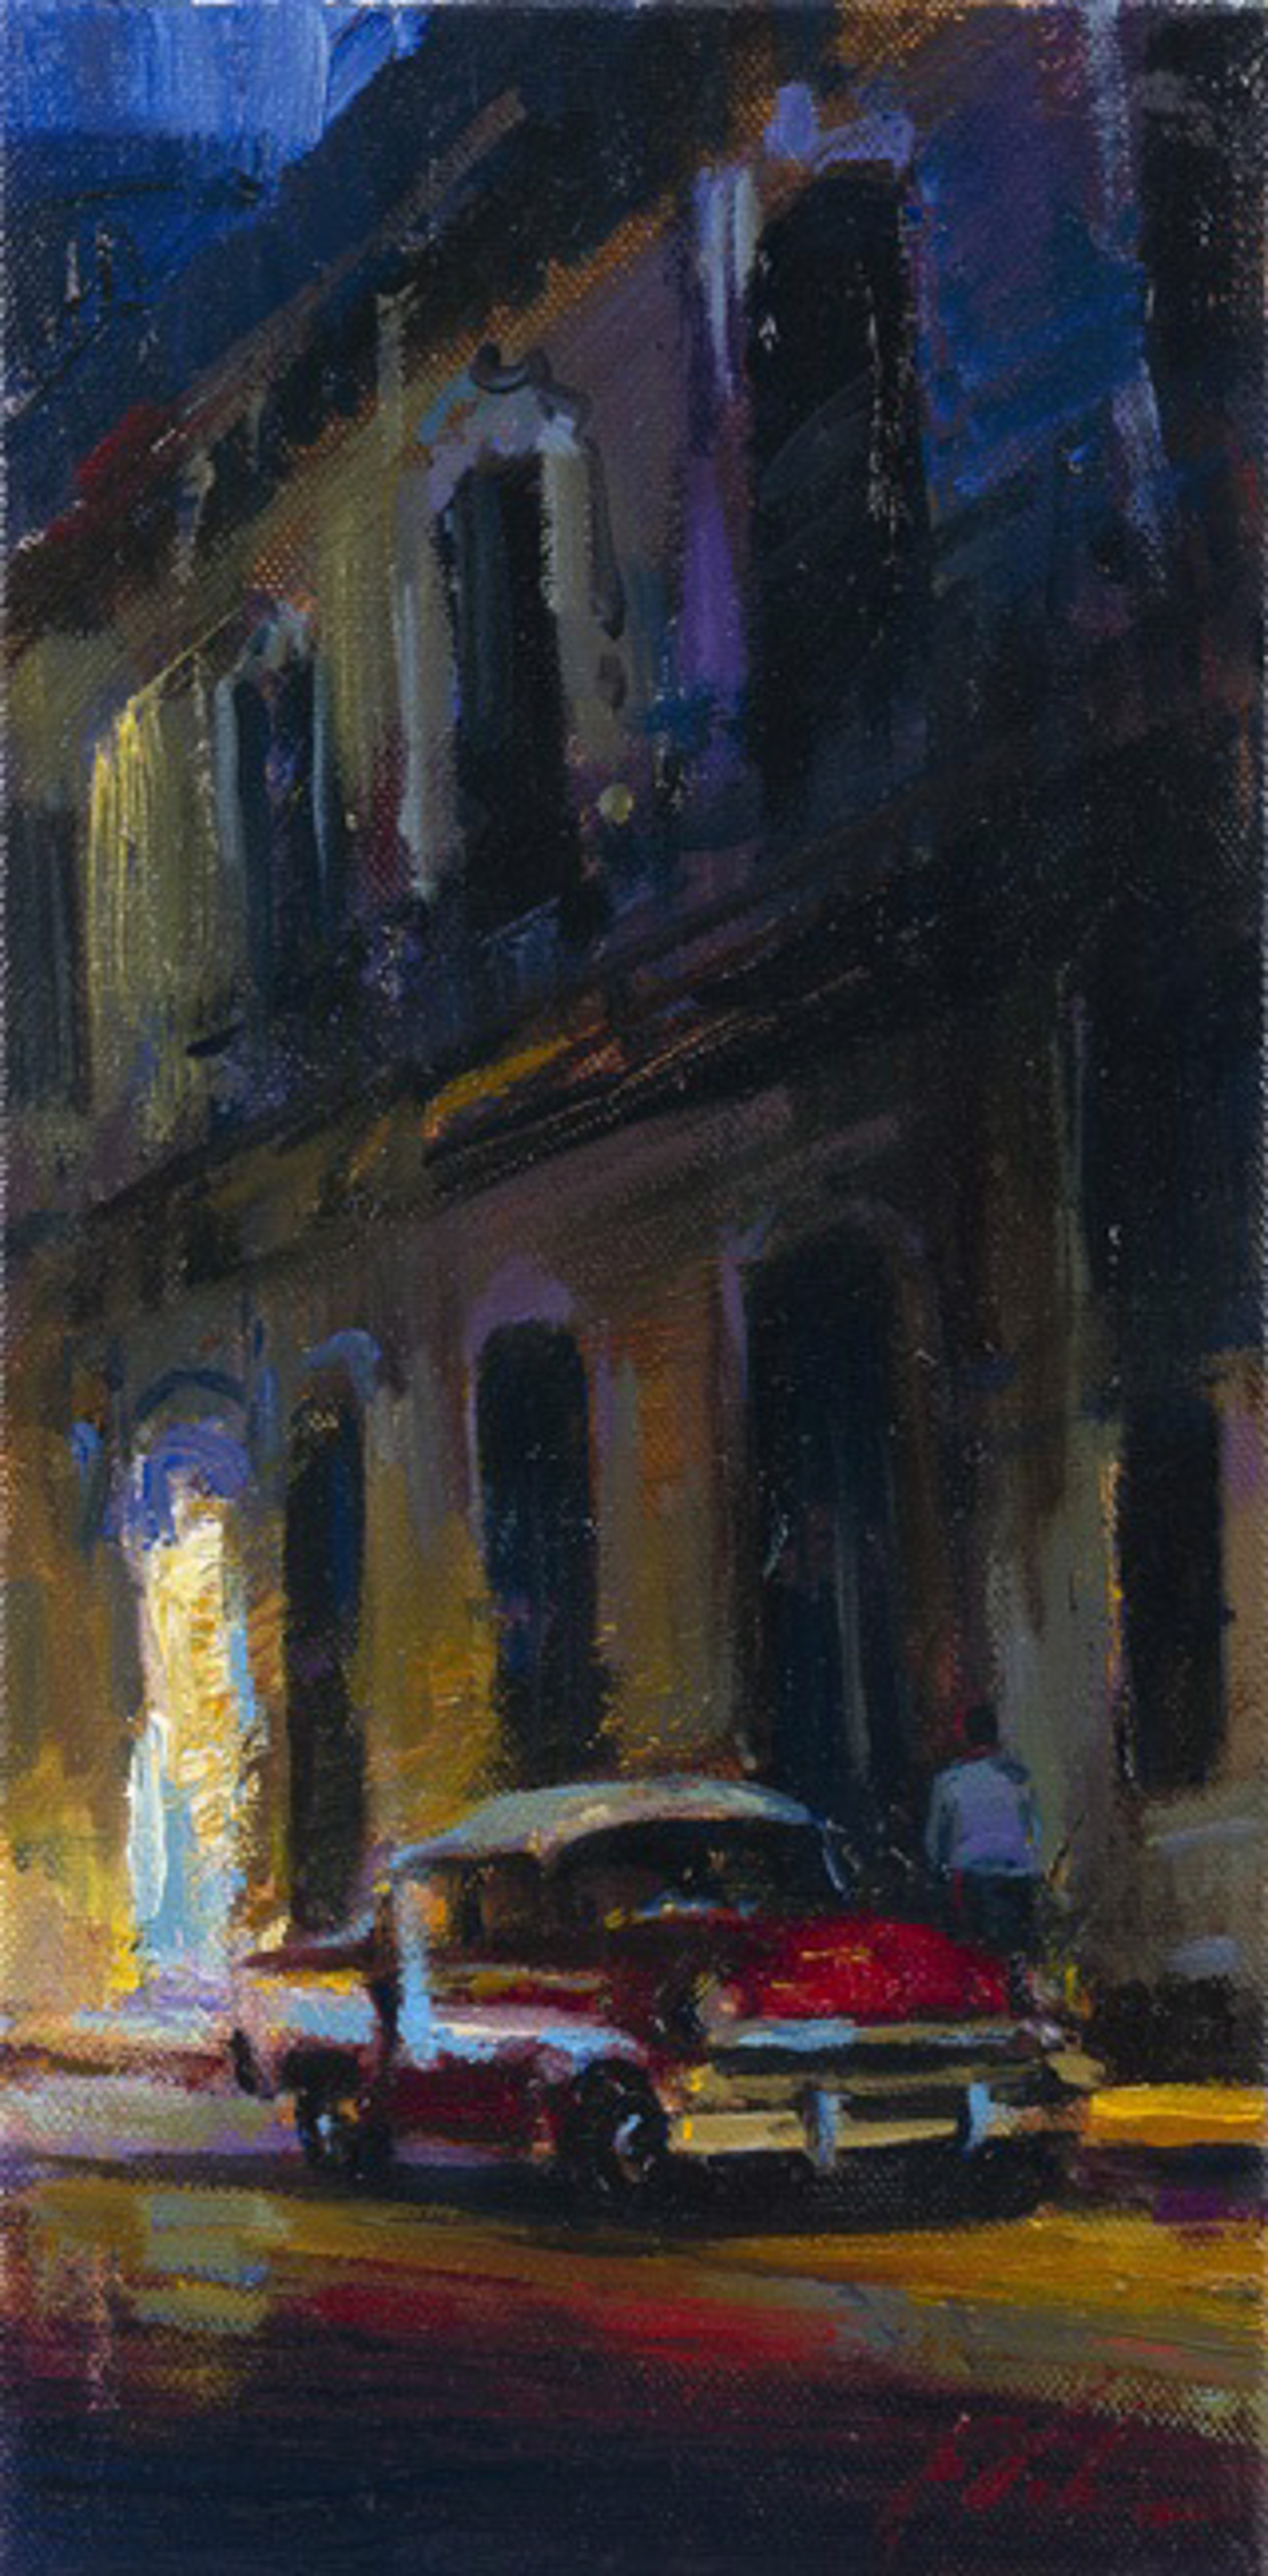 Cuban Night Cap Postcards From Around the World by Michael Flohr